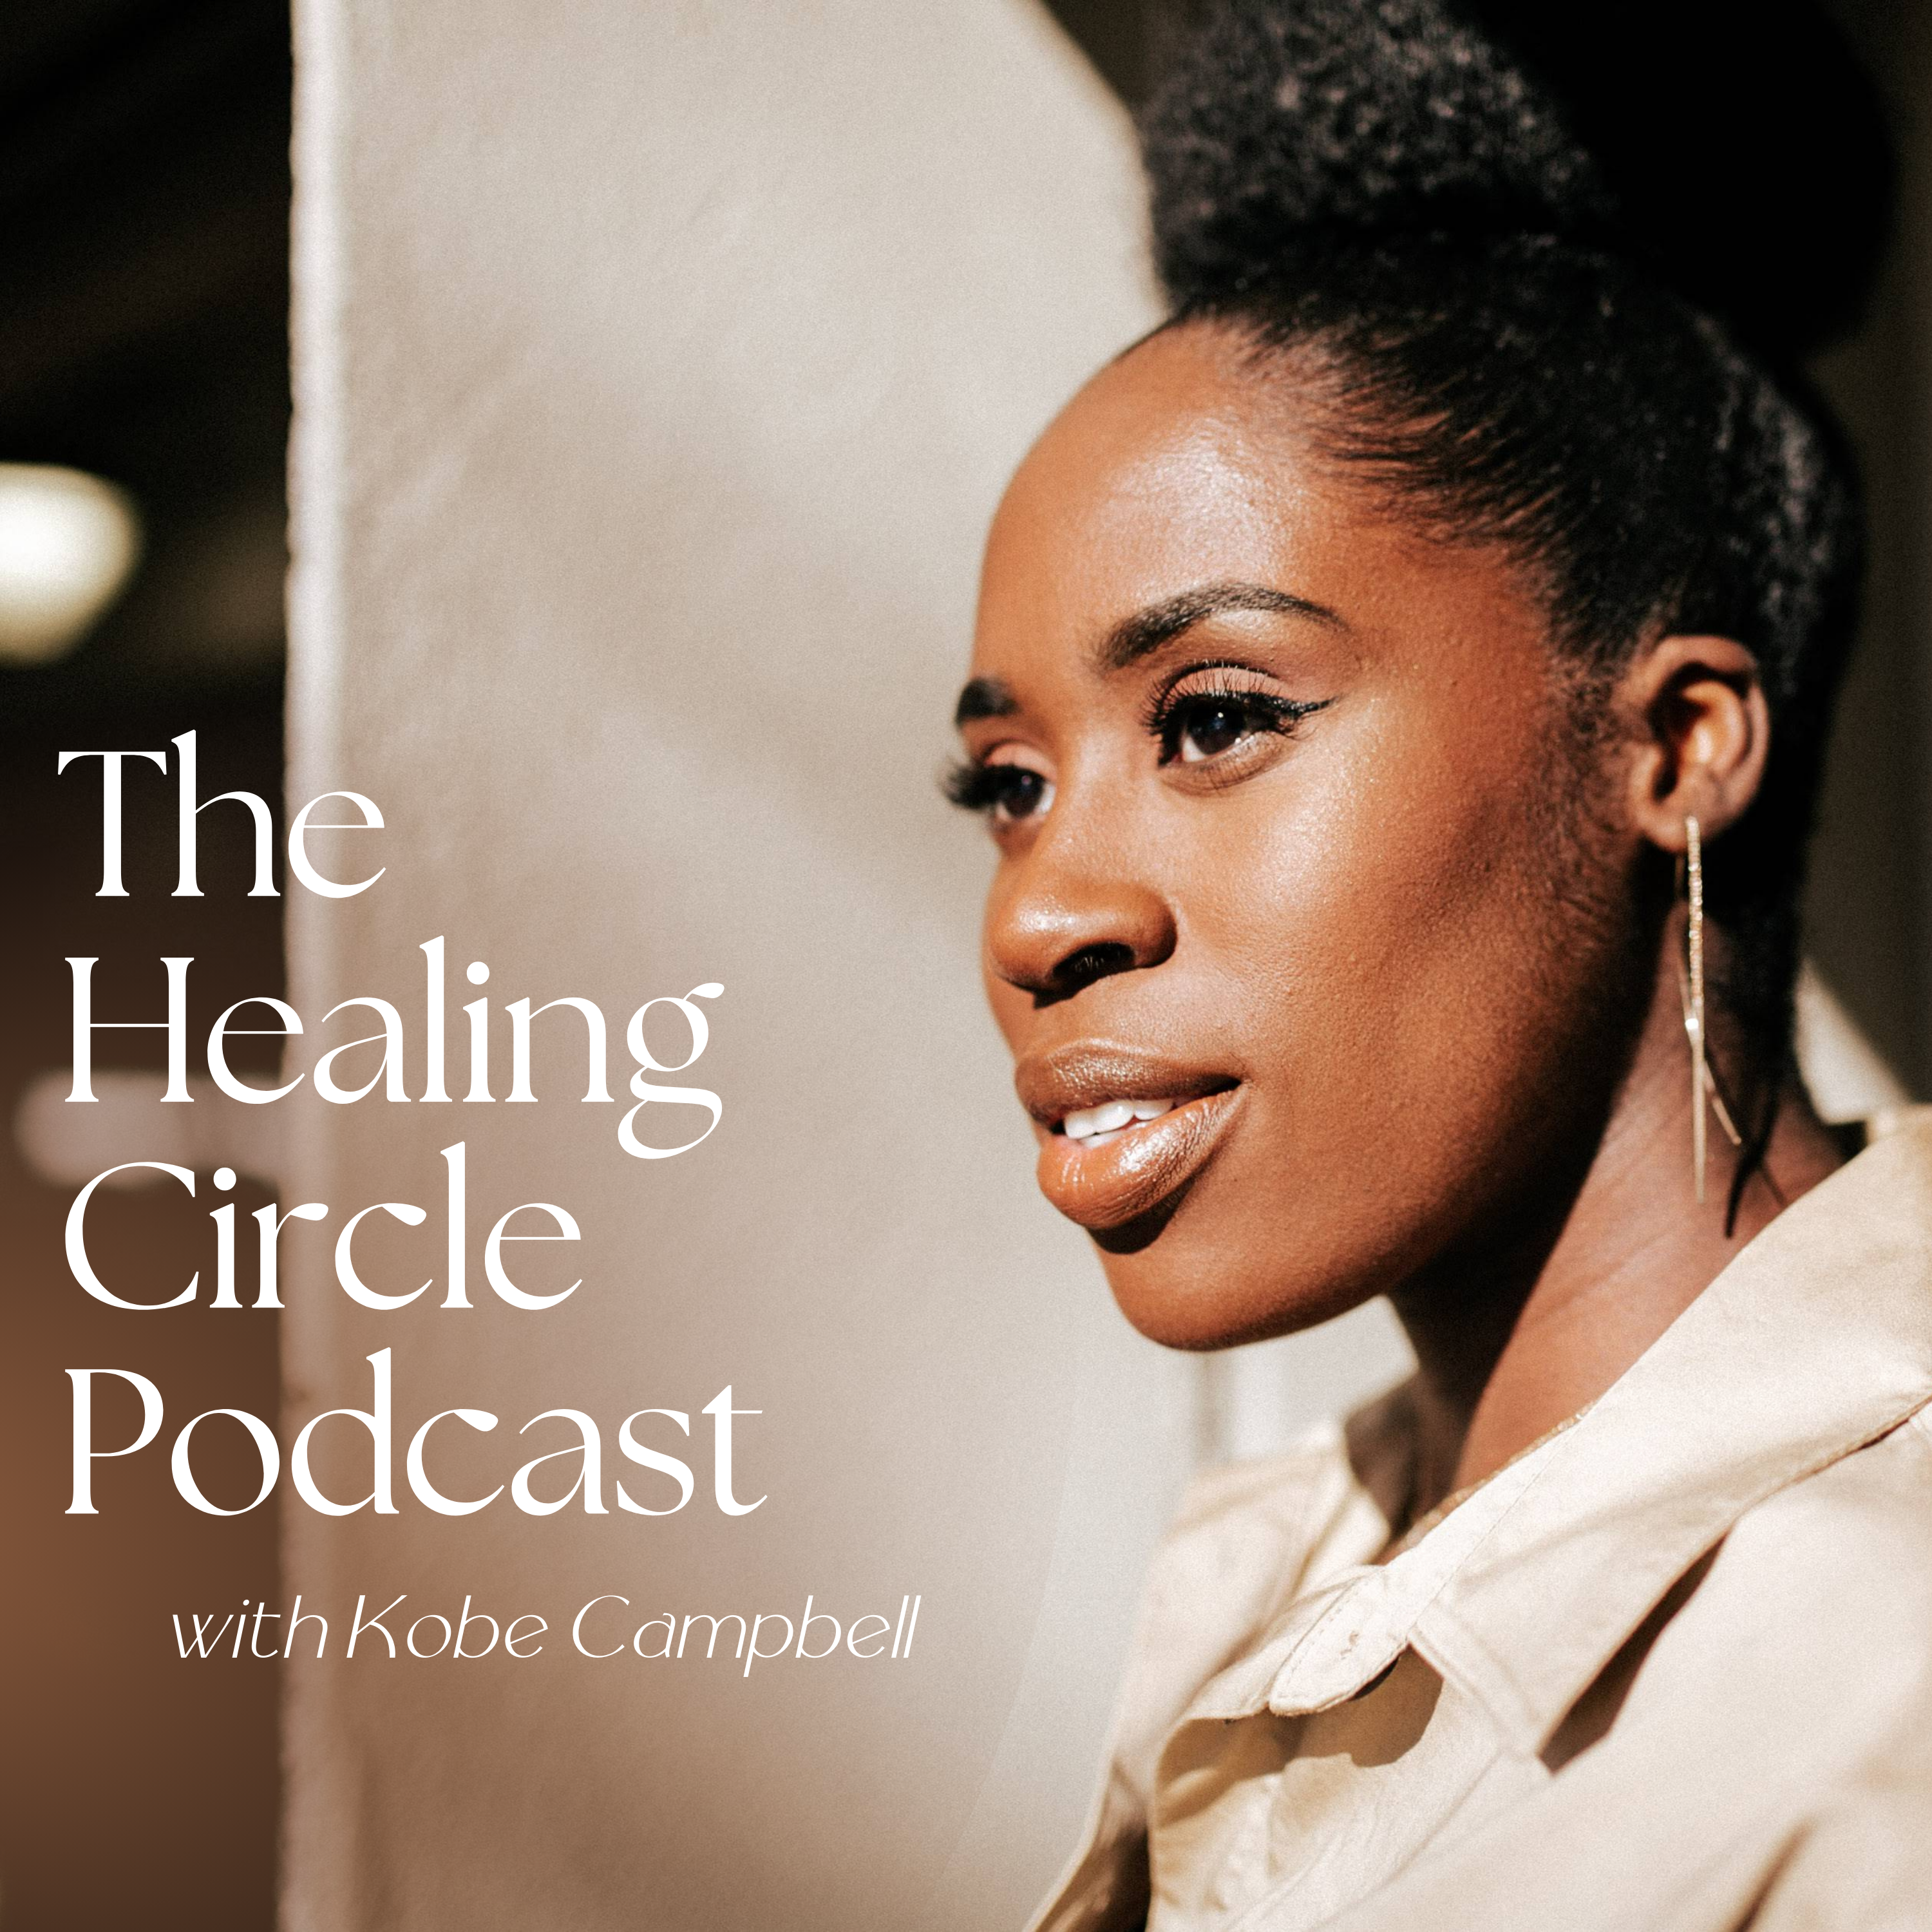 Welcome to The Healing Circle Podcast